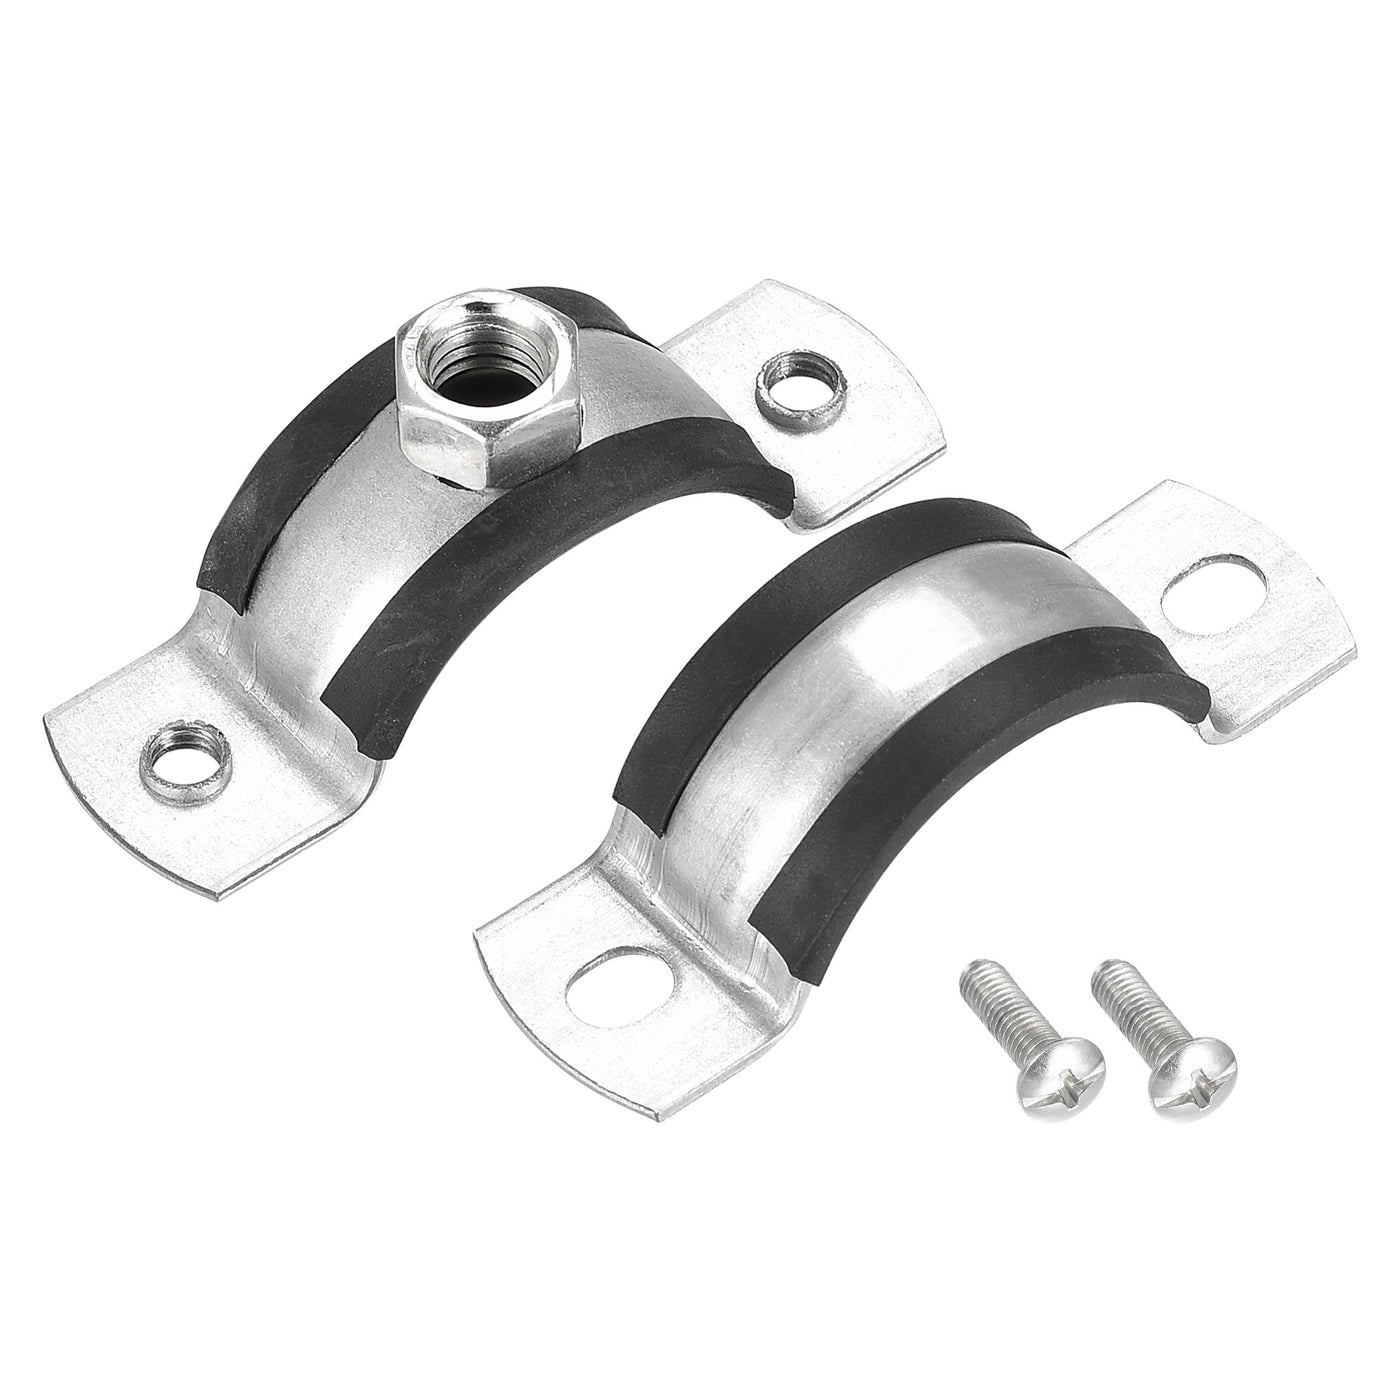 Uxcell Uxcell Adjustable Pipe Bracket Clamp, 2-1/2" (63mm) Wall Ceiling Mount Iron Pipe Strap Support 10pcs